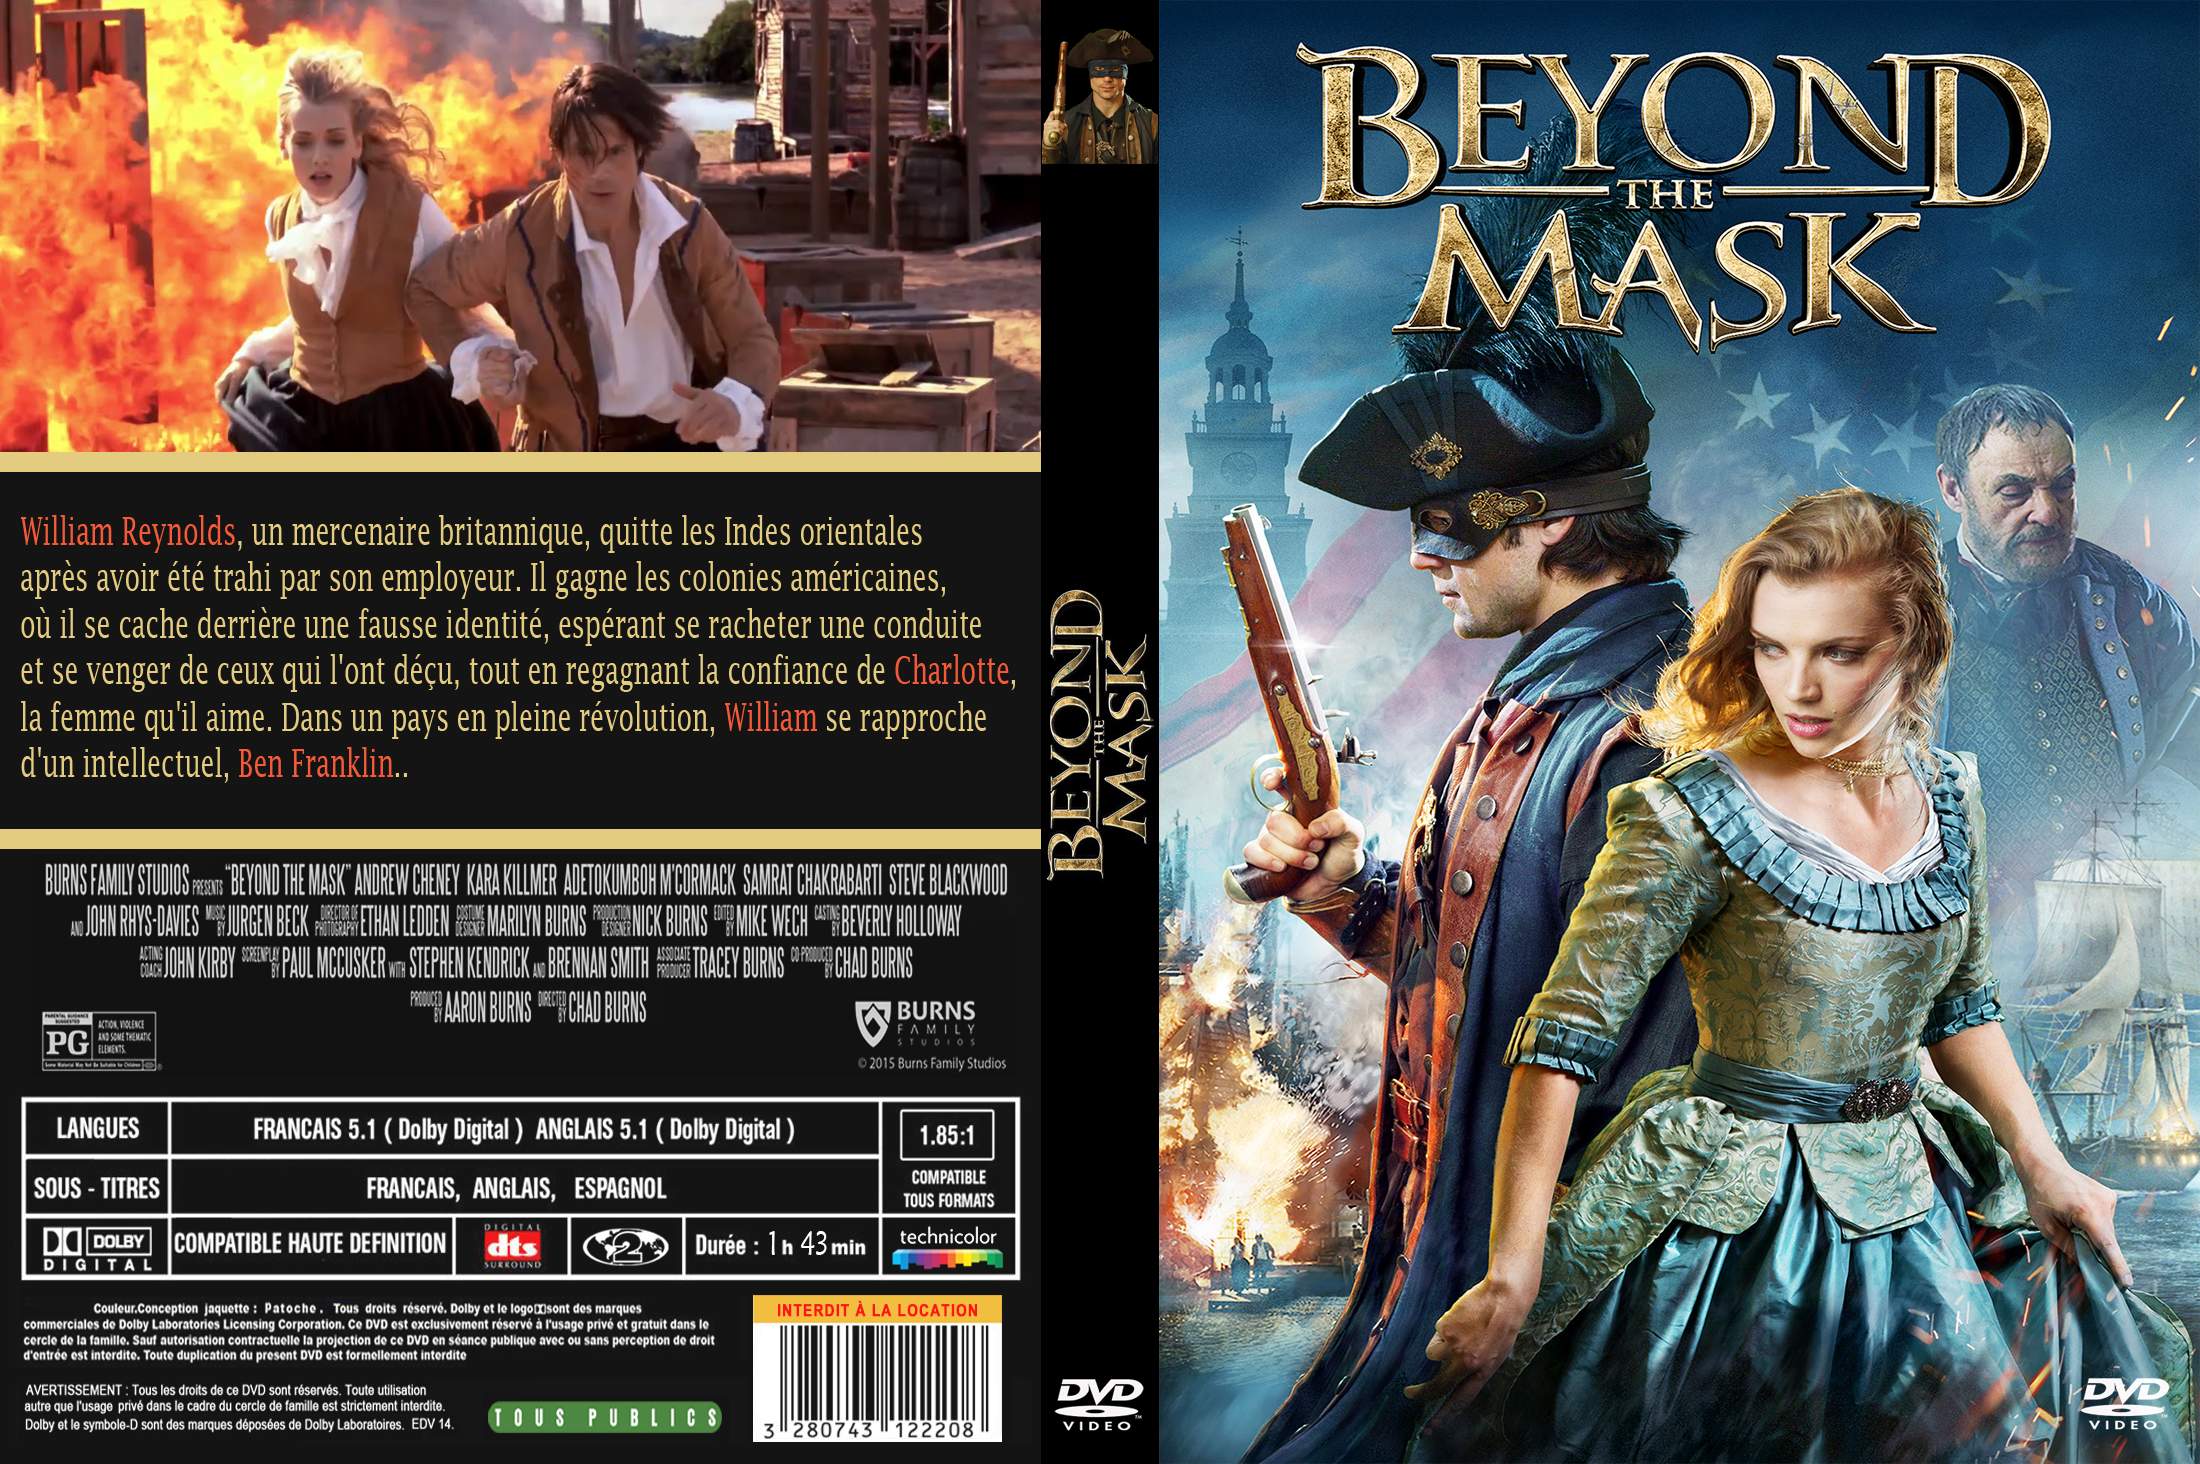 Jaquette DVD Beyond the mask custom